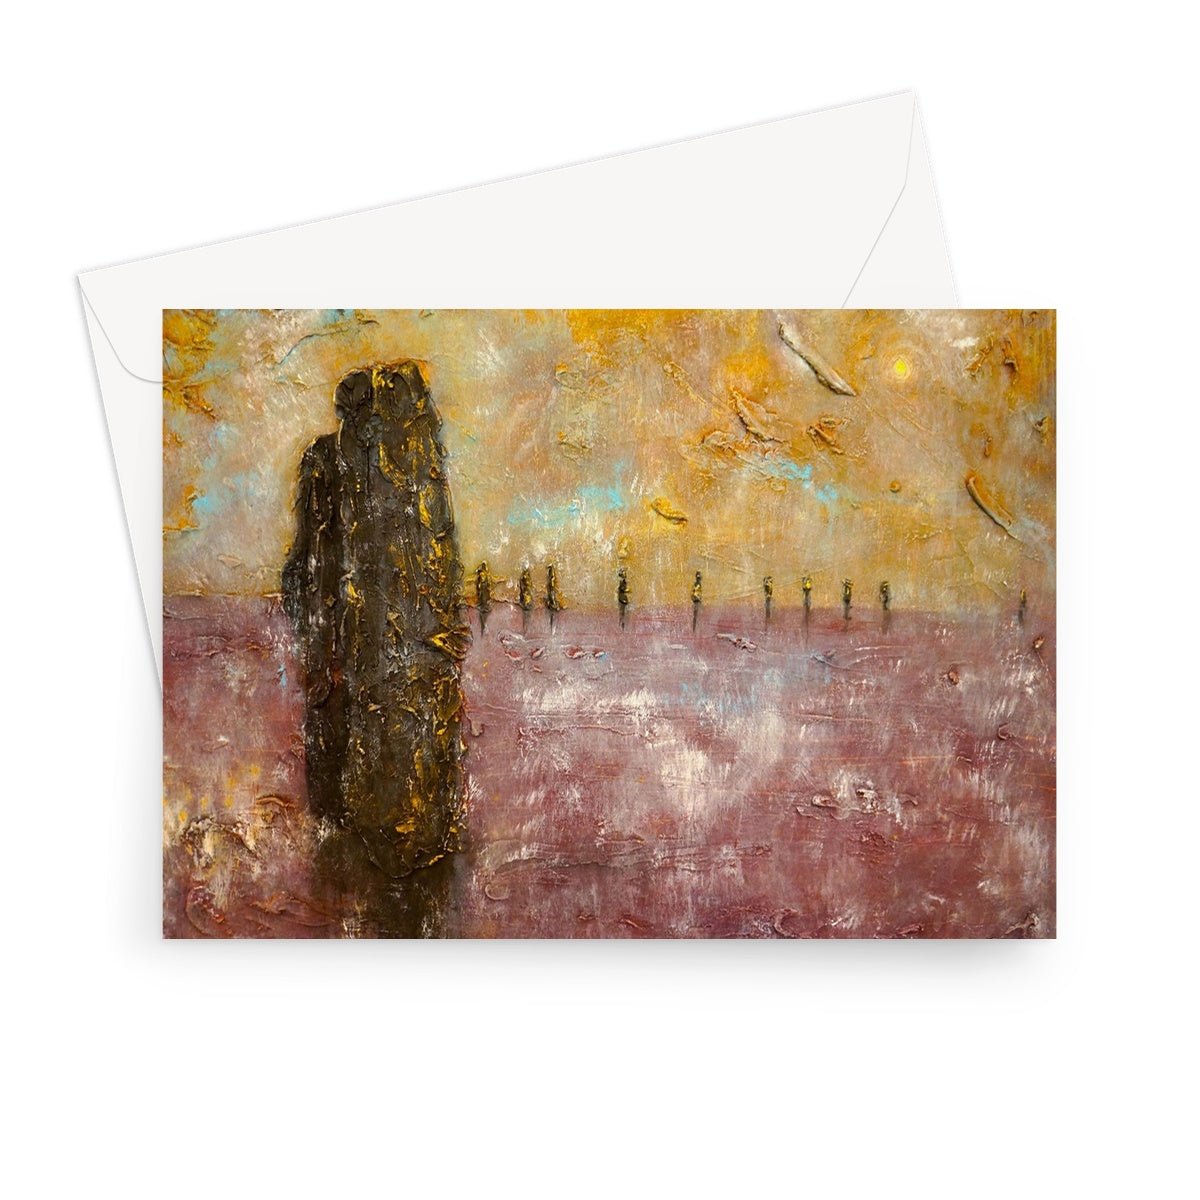 Bordgar Mist Orkney Art Gifts Greeting Card-Greetings Cards-Orkney Art Gallery-7"x5"-1 Card-Paintings, Prints, Homeware, Art Gifts From Scotland By Scottish Artist Kevin Hunter